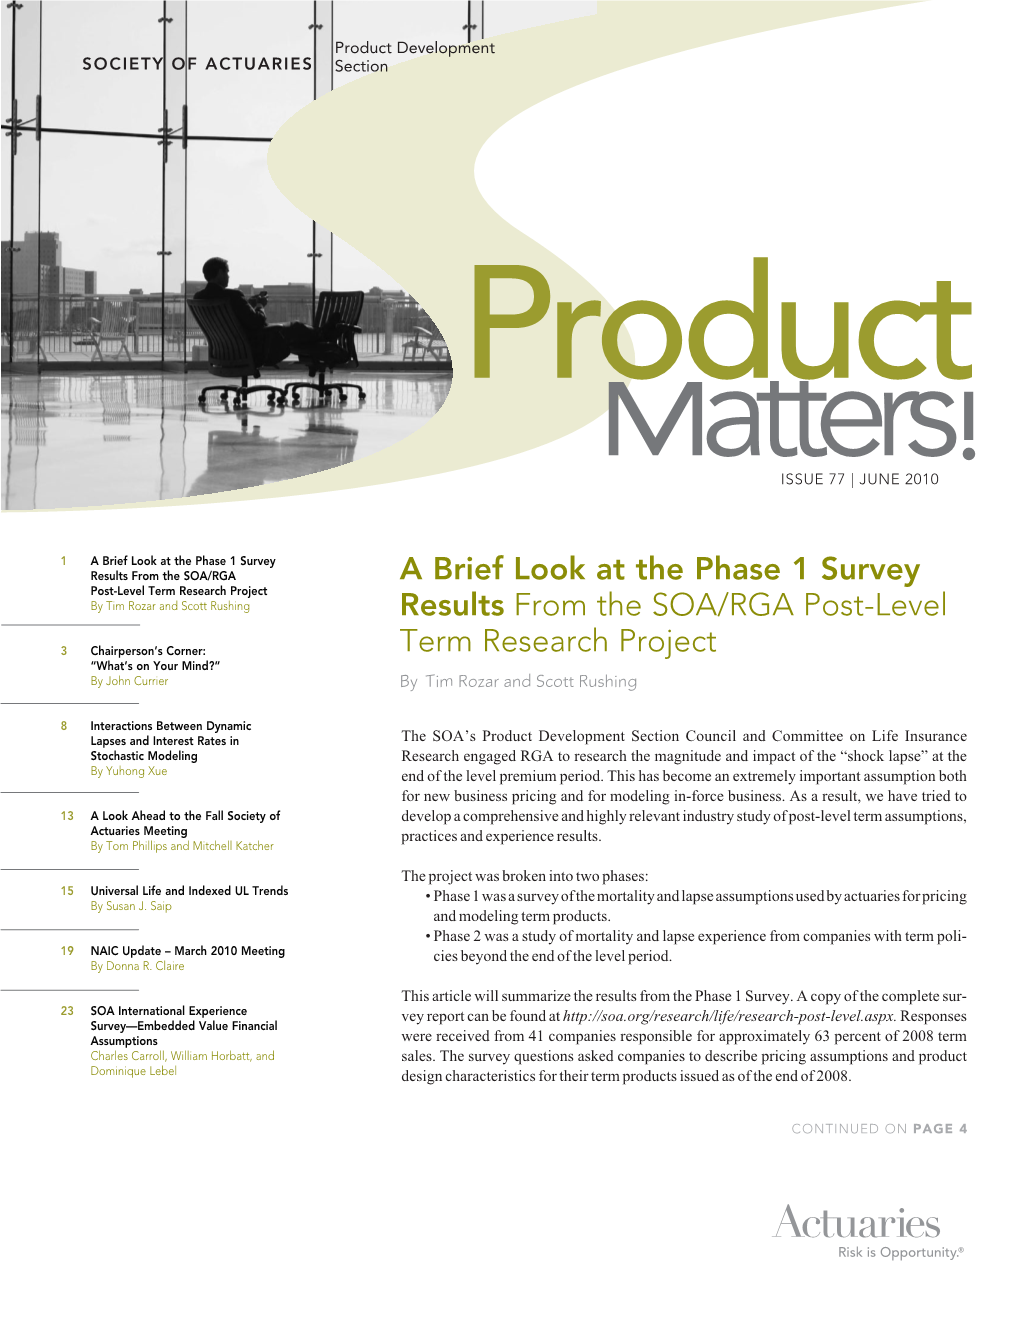 Product & Development Section, Issue 77, June 2010